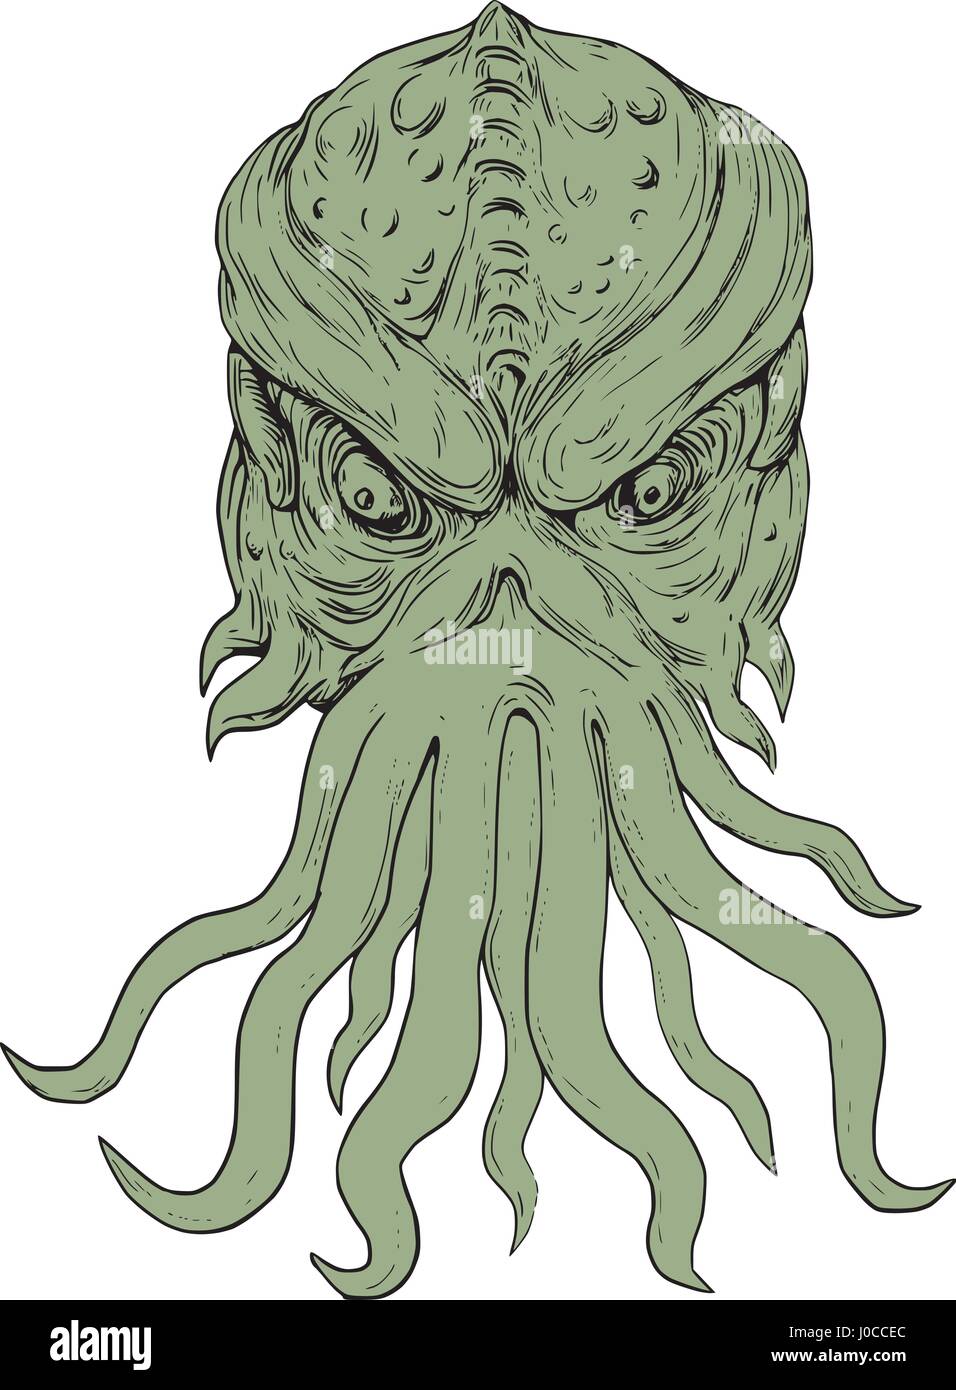 Drawing sketch style illustration of a head of a subterranean mythical sea monster with octopus-like head whose face has tentacles or feeler viewed fr Stock Vector